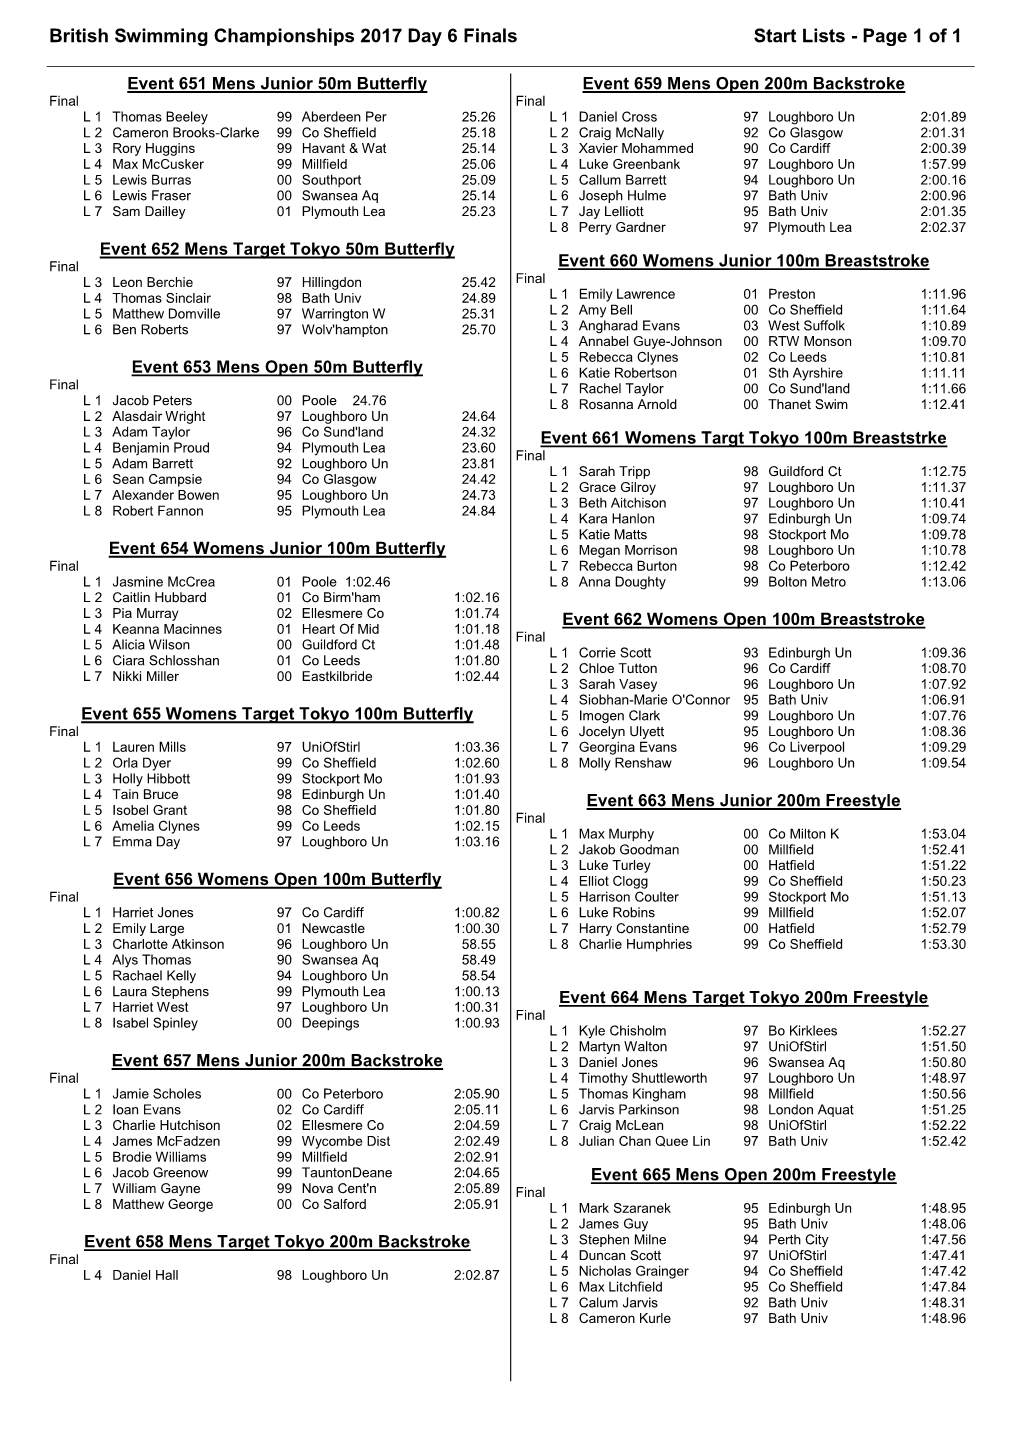 British Swimming Championships 2017 Day 6 Finals Start Lists - Page 1 of 1